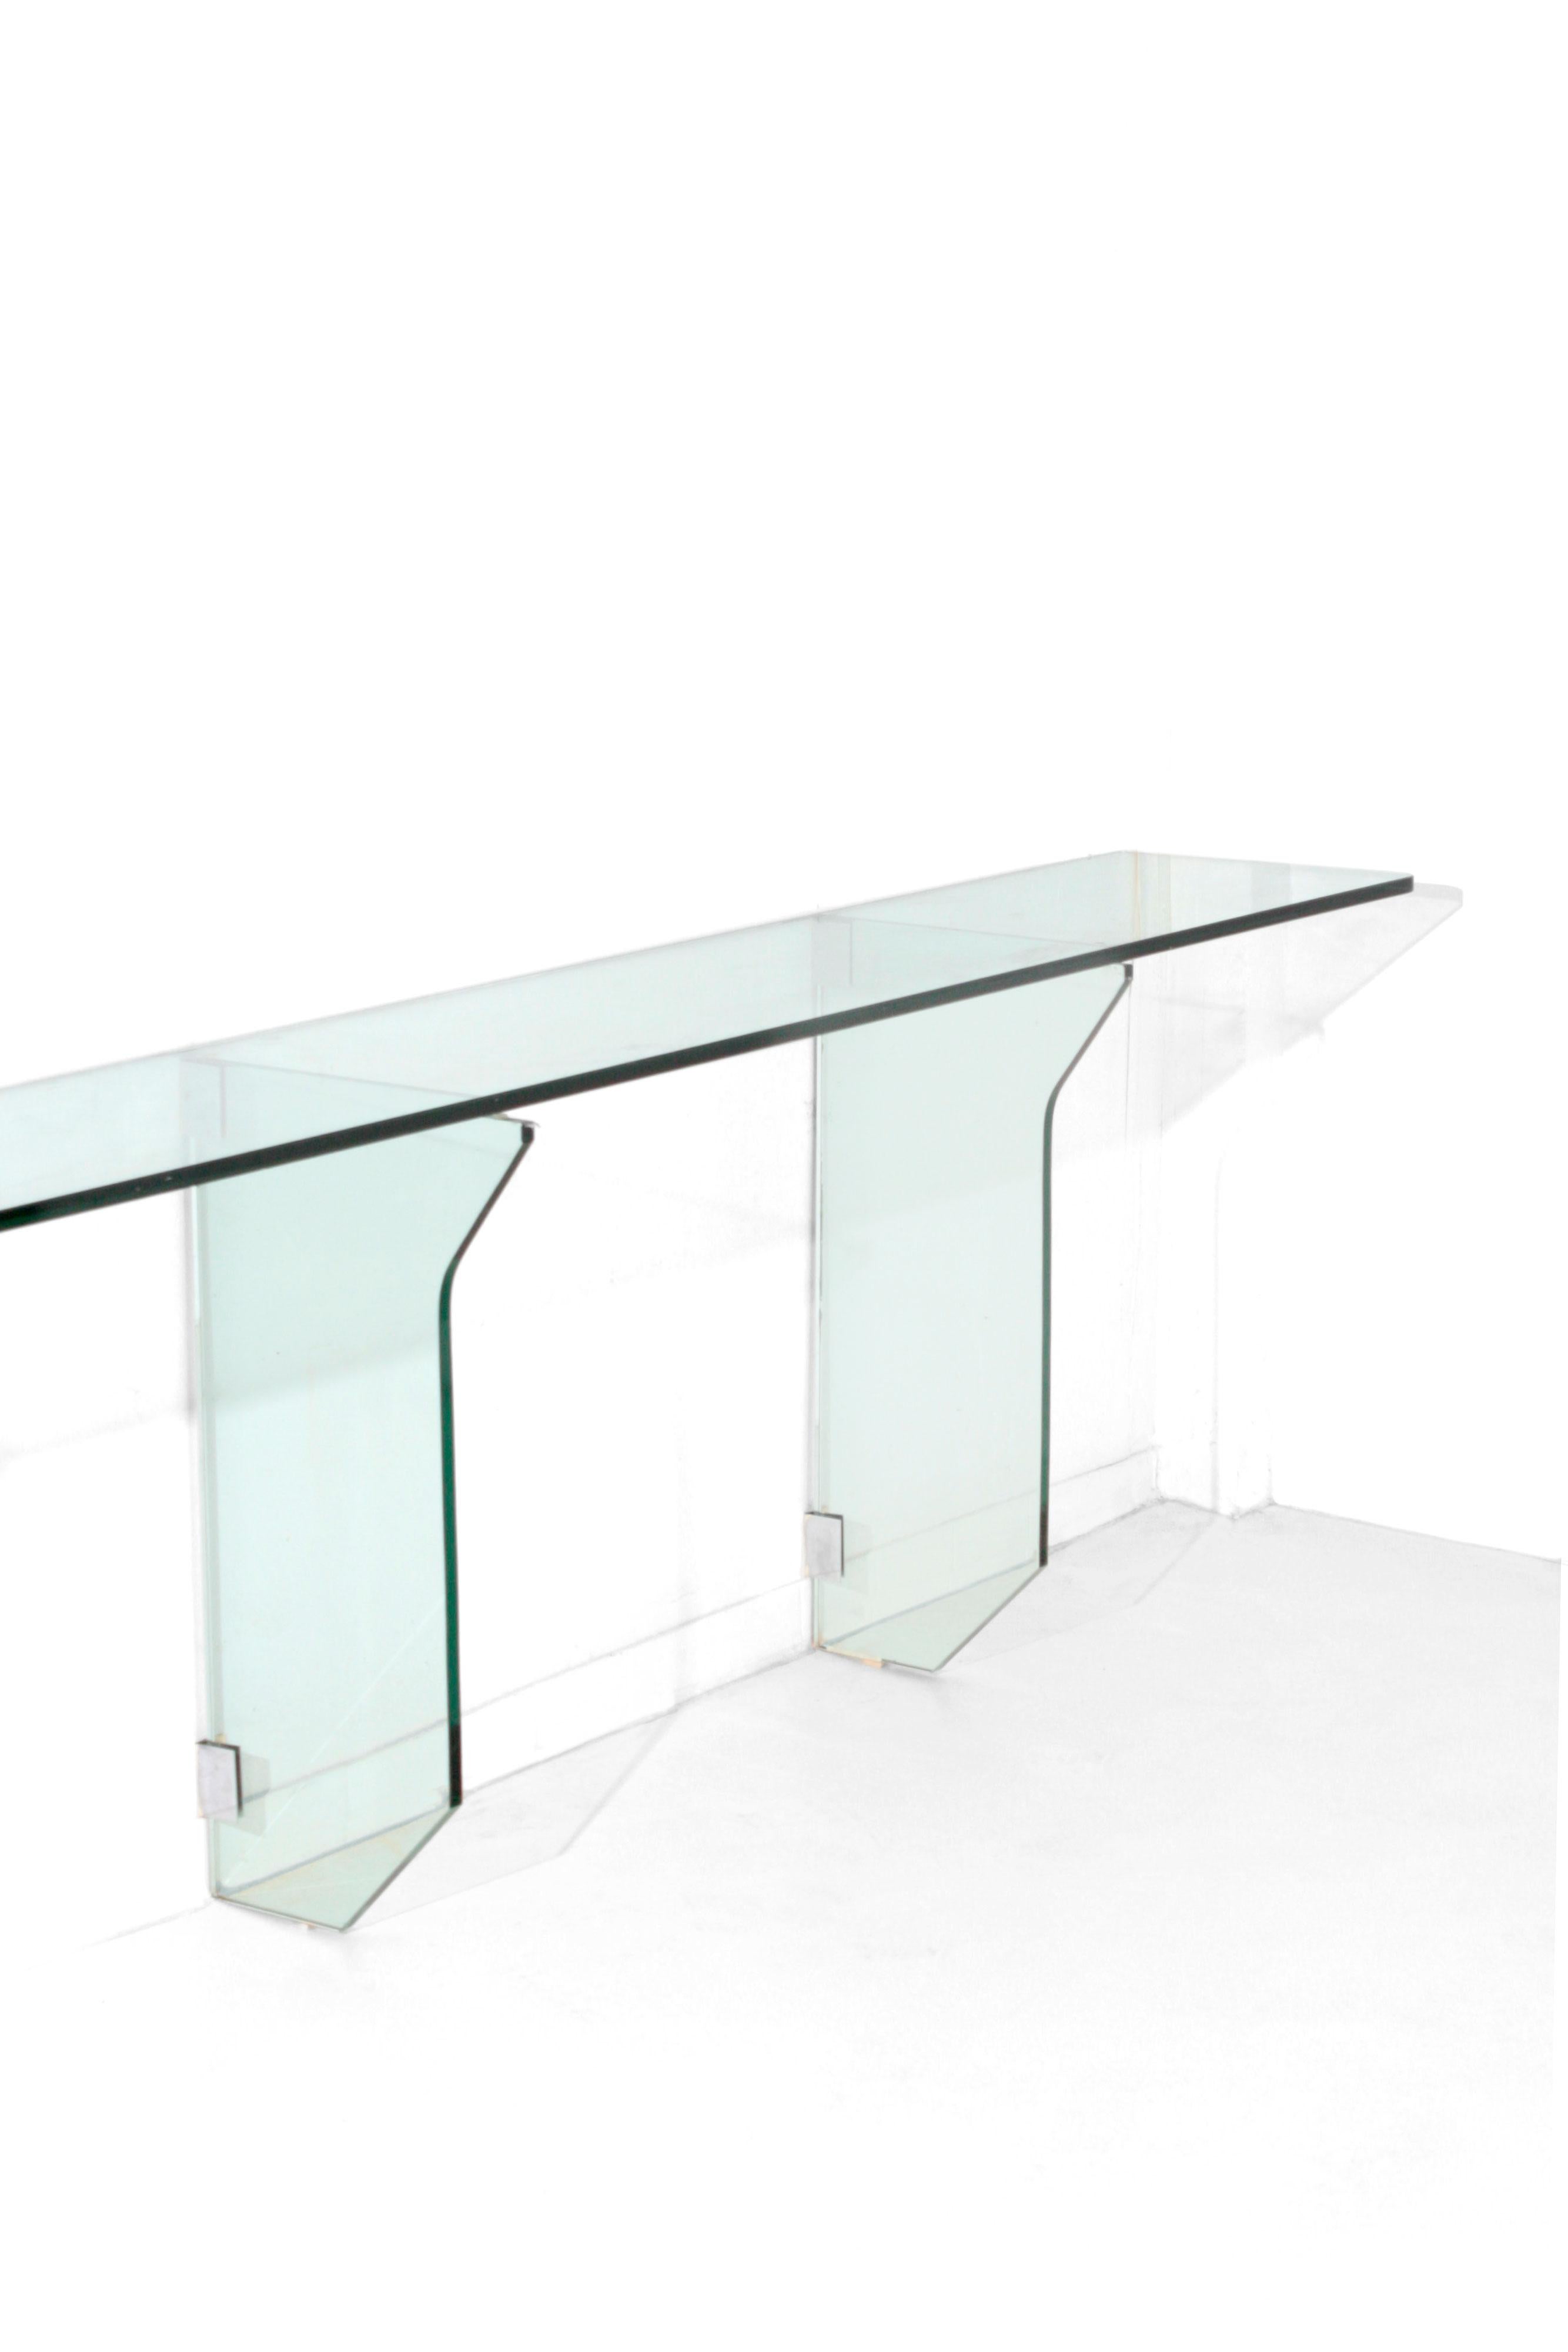 Fontana Arte. Large console in thick glass with three supports in ground and shaped glass. As you can see from the photo the console is supported by three shaped glass pedestals. Supports and details in nickel-plated brass.
Given its size, the